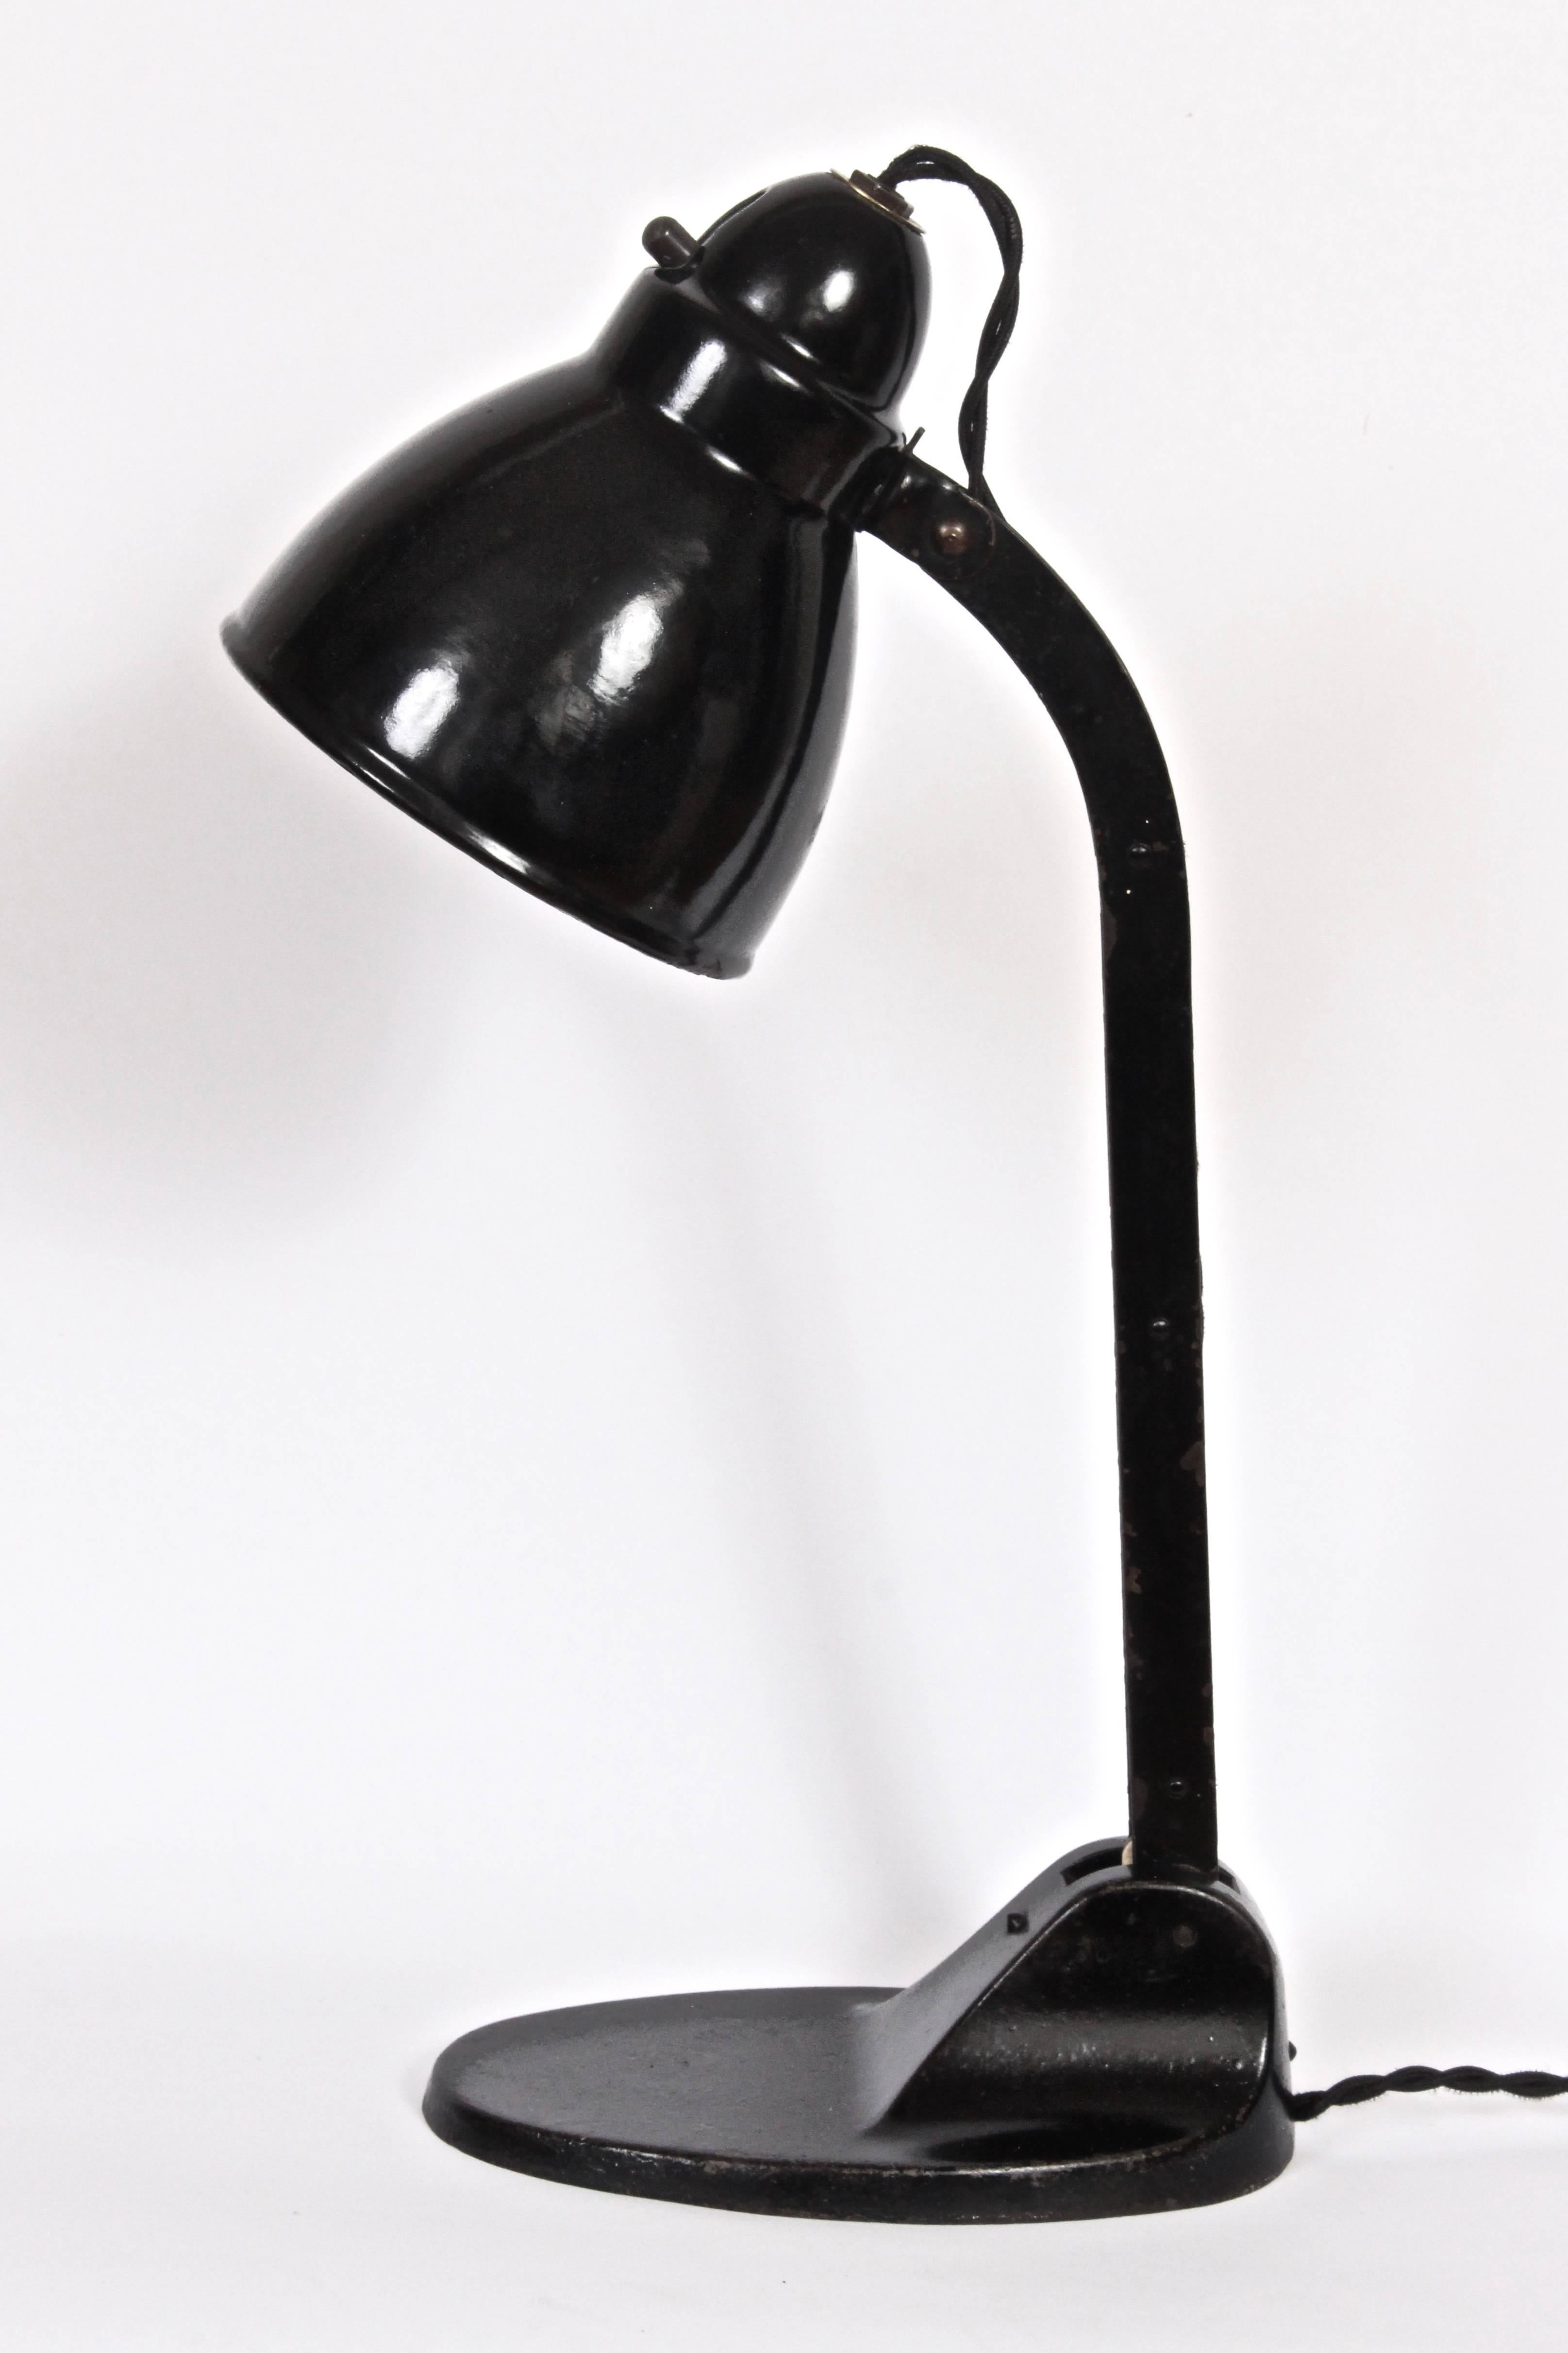 Viktoria Lampe adjustable industrial table lamp in the style of Jacobus Johannes Pieter Oud. Featuring adjustments at Black enameled Steel shade and black cast Iron base. Stamped with Original condition. Original toggle switch. Rewired with black